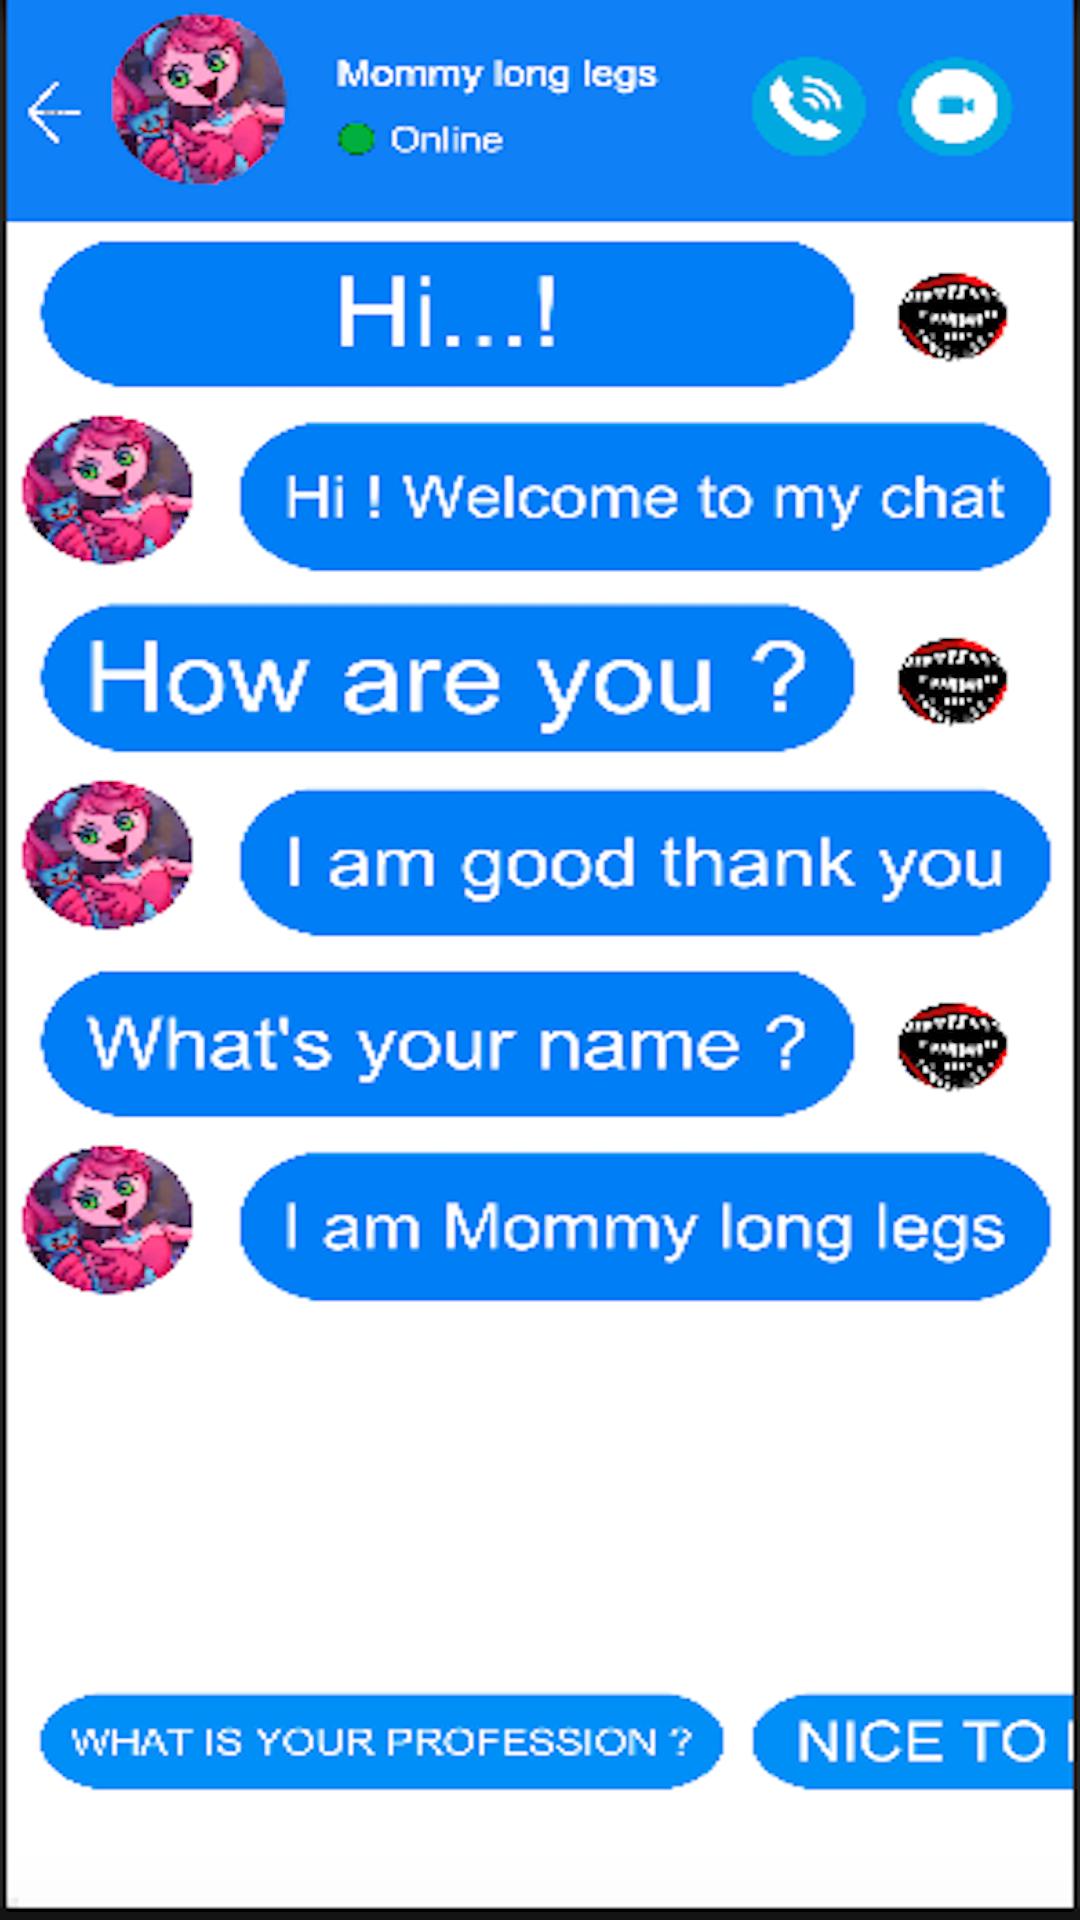 Baixe Mommy long legs video call no PC